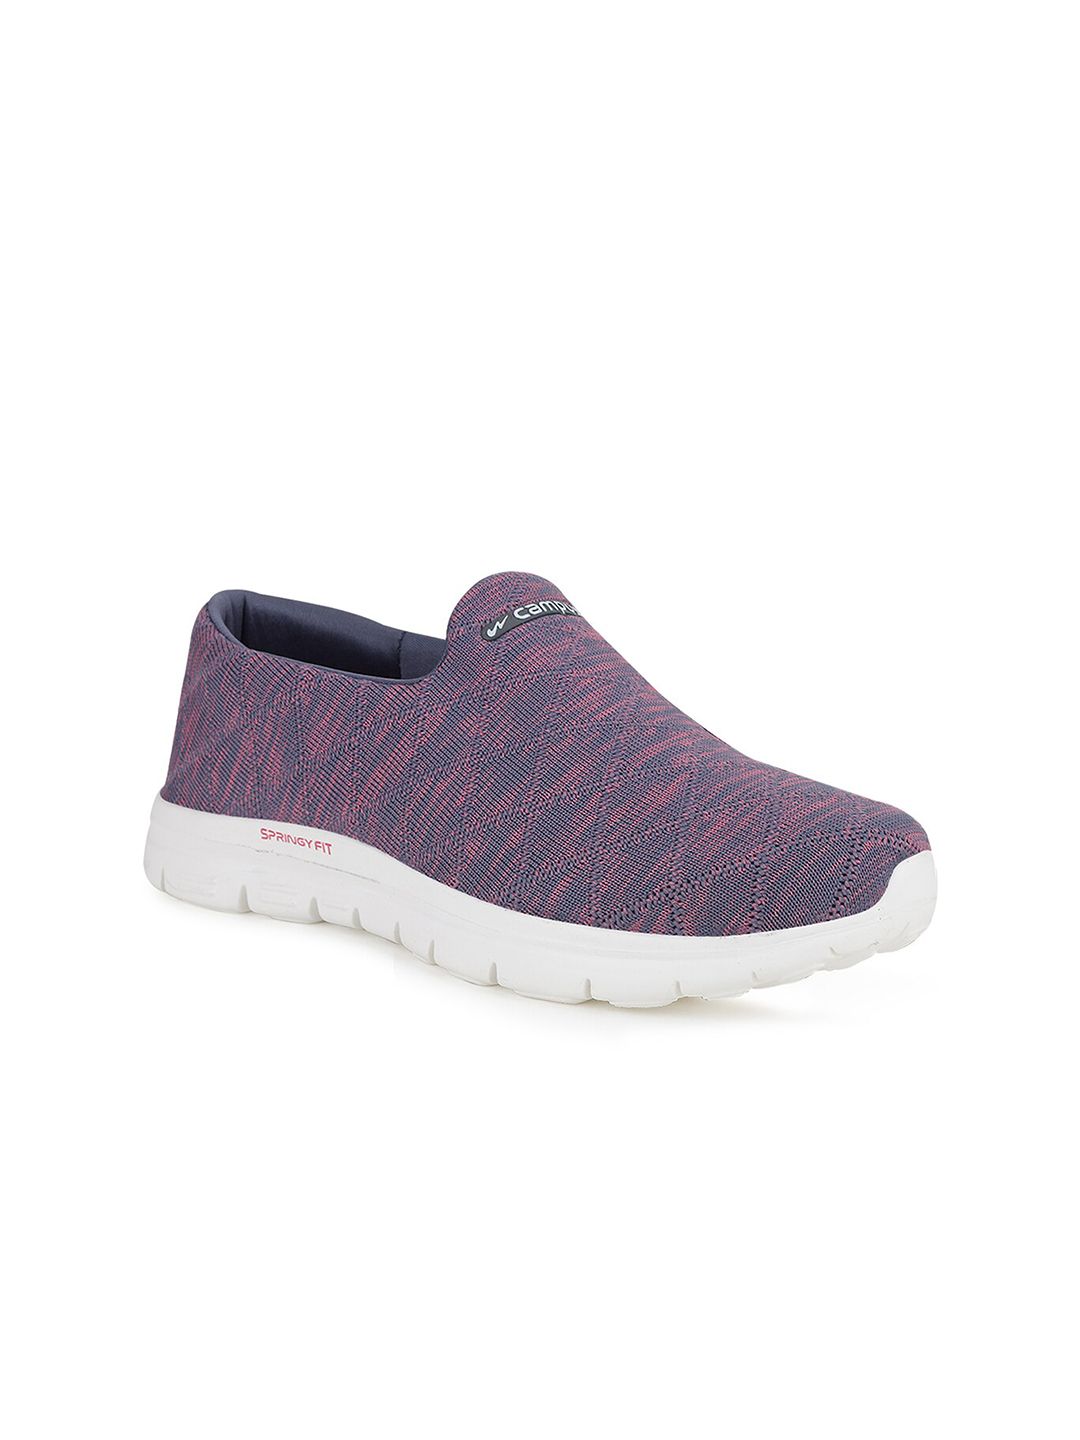 Campus Women Pink Mesh Running Shoes Price in India